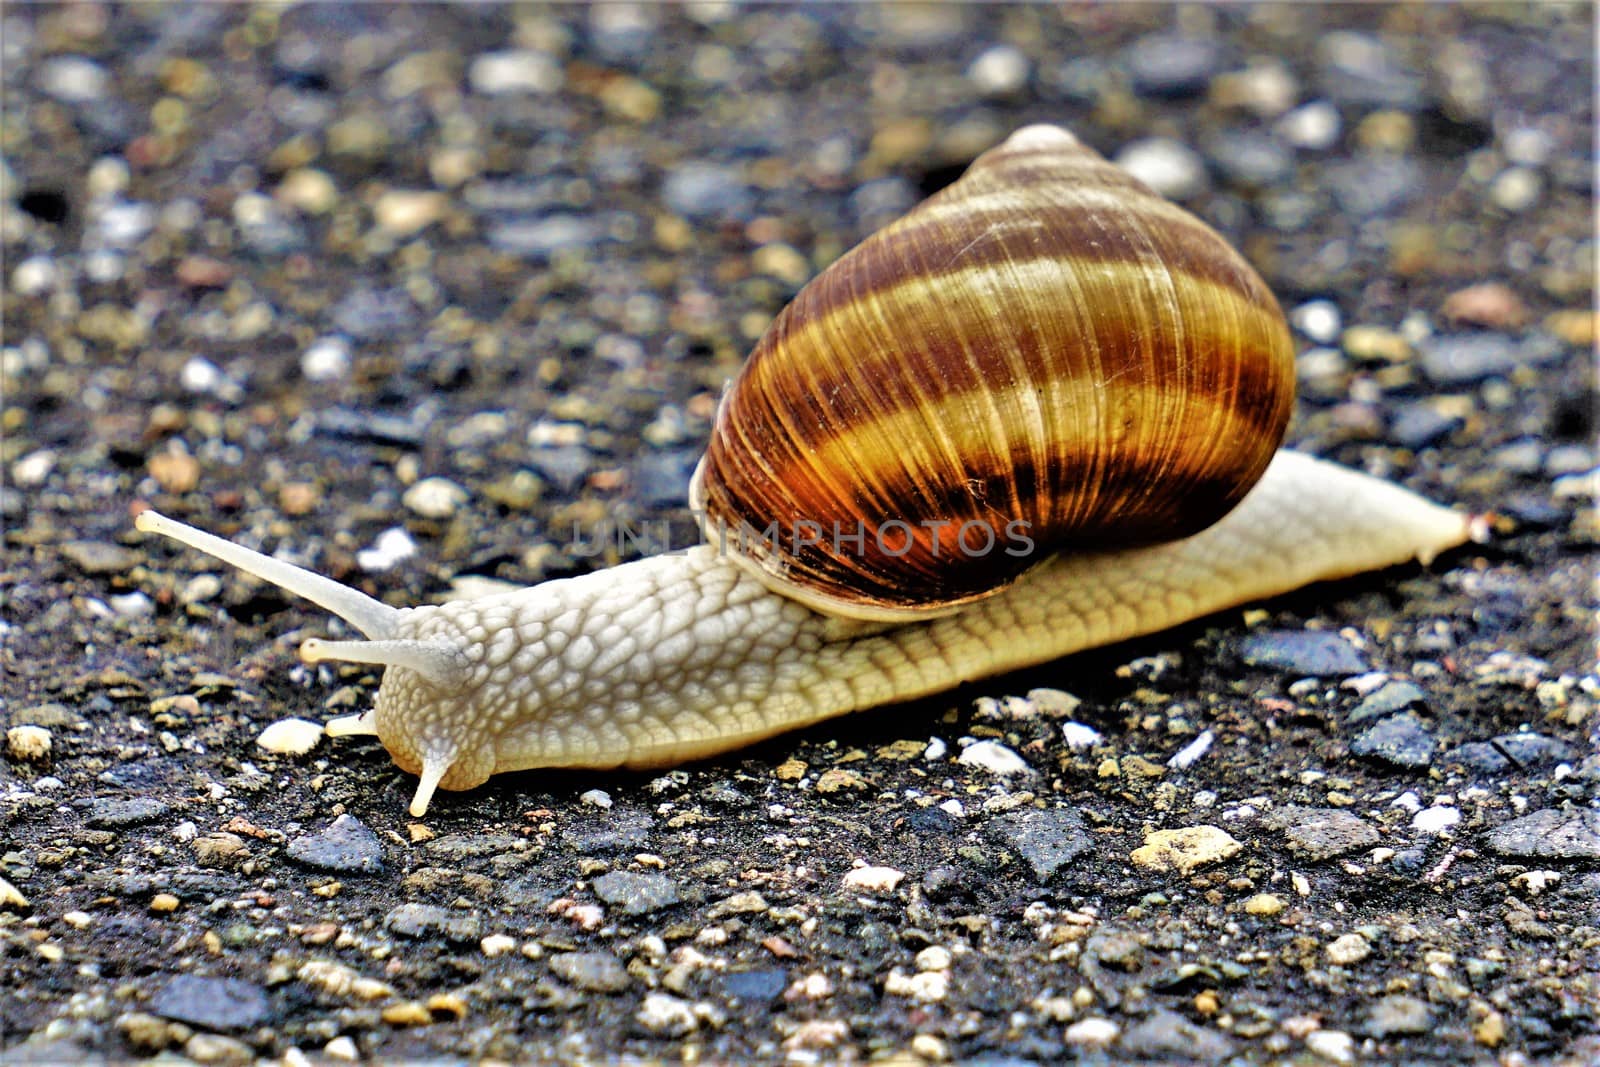 Photo of a vineyard snail crawling on a pathway